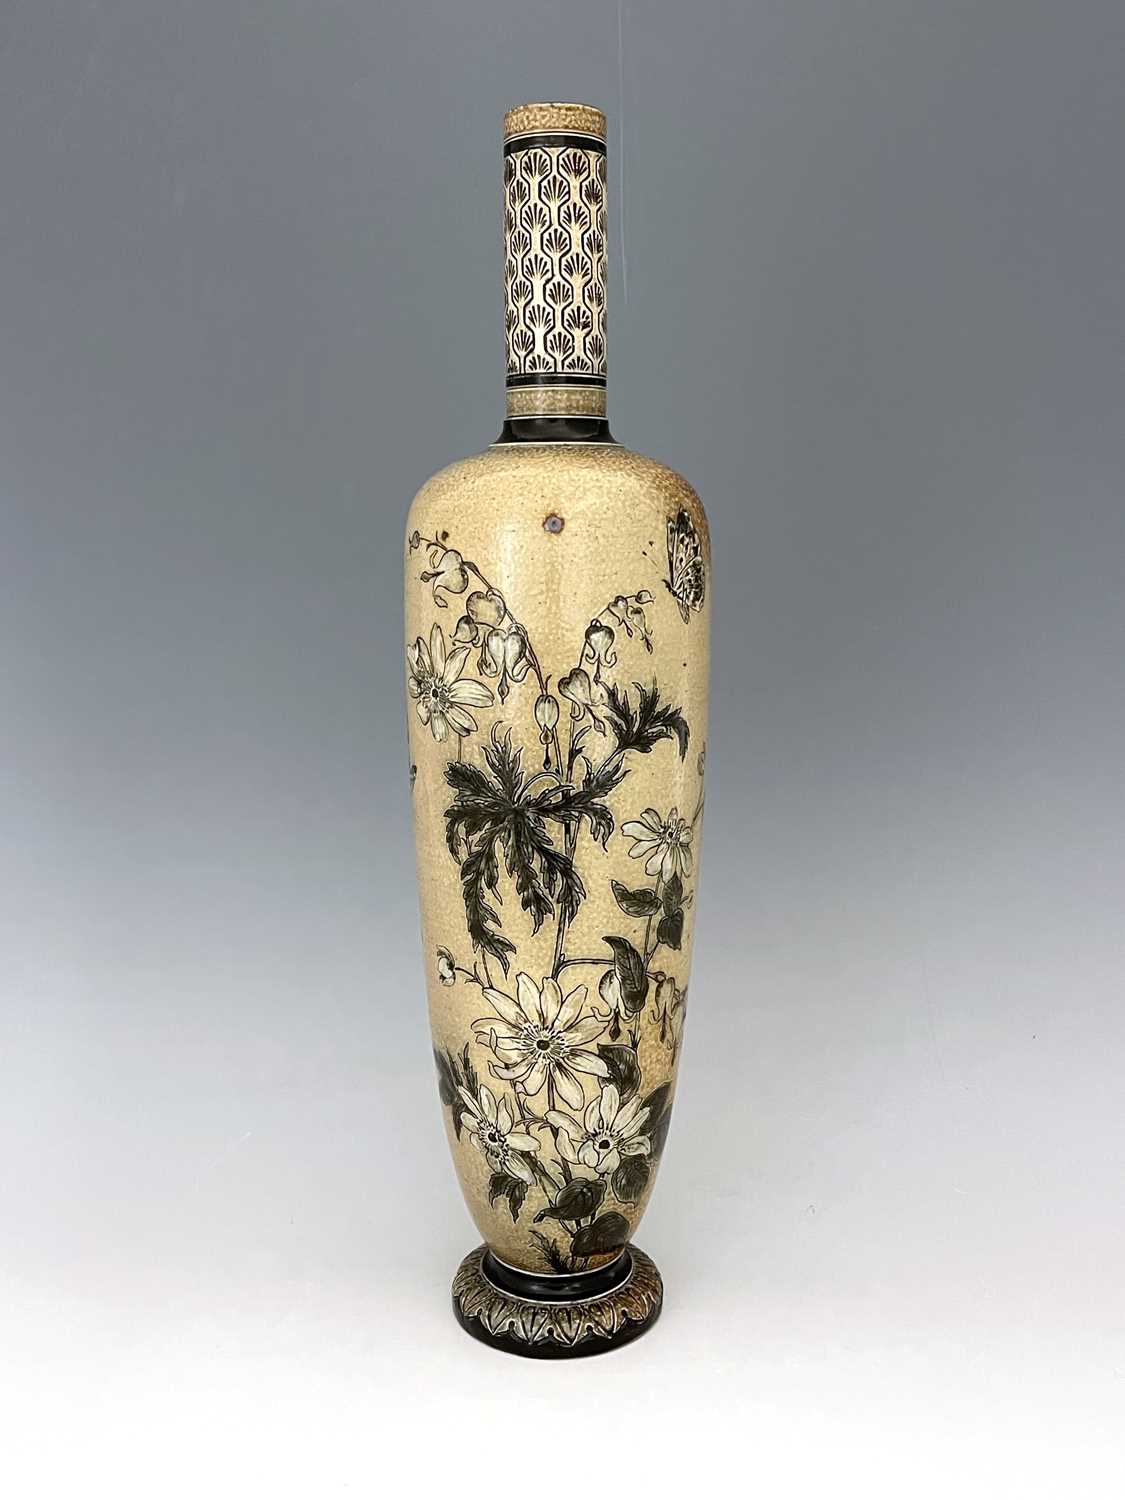 Edwin Martin for Martin Brothers, a large stoneware Wildflower vase, 1886, shouldered footed form - Image 4 of 6